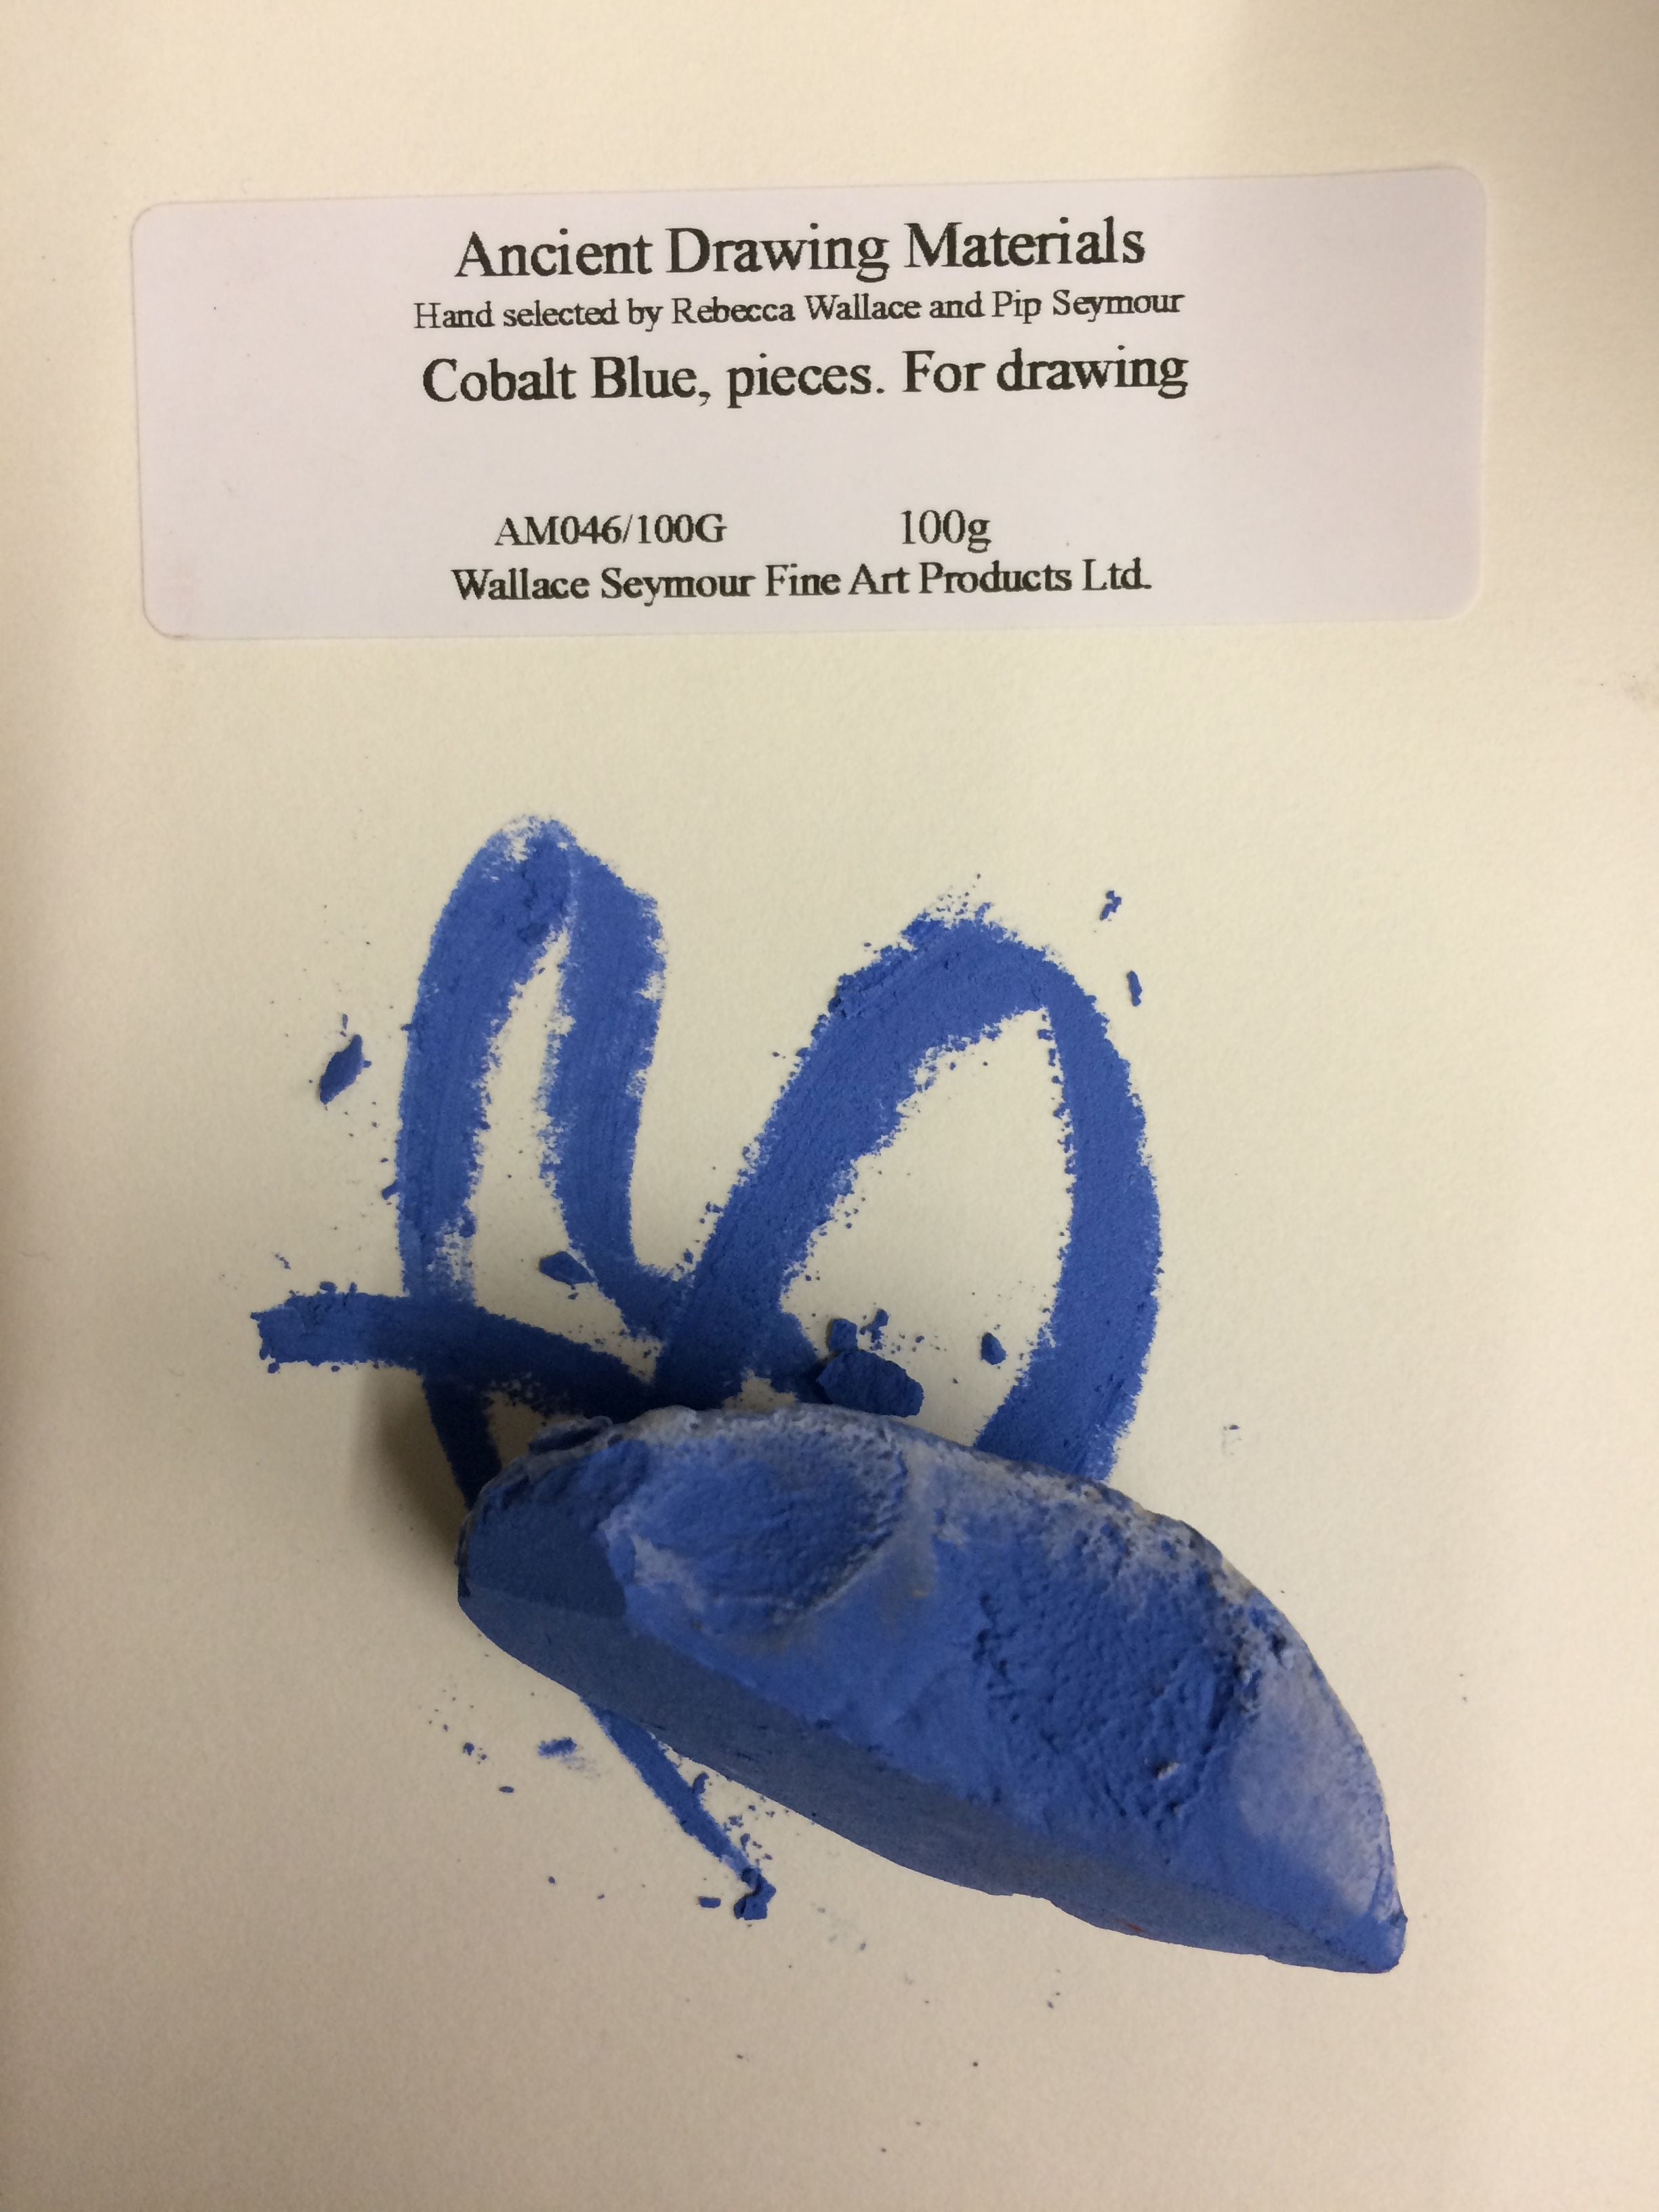 Cobalt Blue, pieces - Drawing Stone